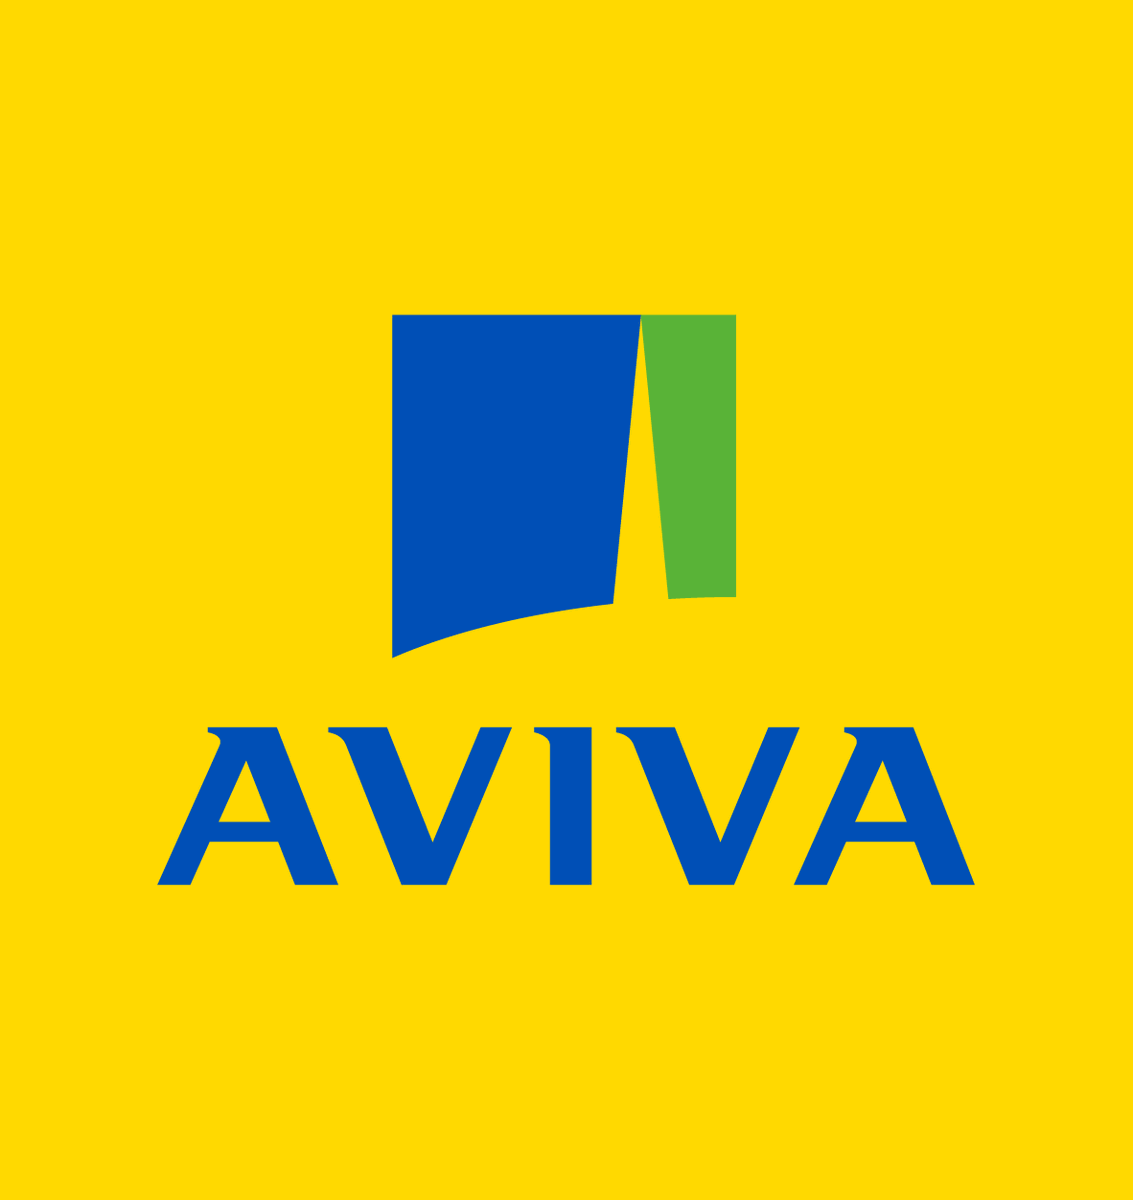 We are thrilled to announce that @AvivaPLC, has joined forces with Gretel.

Aviva will be working with Gretel to reconnect customers with their lost and dormant life insurance policies, pensions, and annuities.